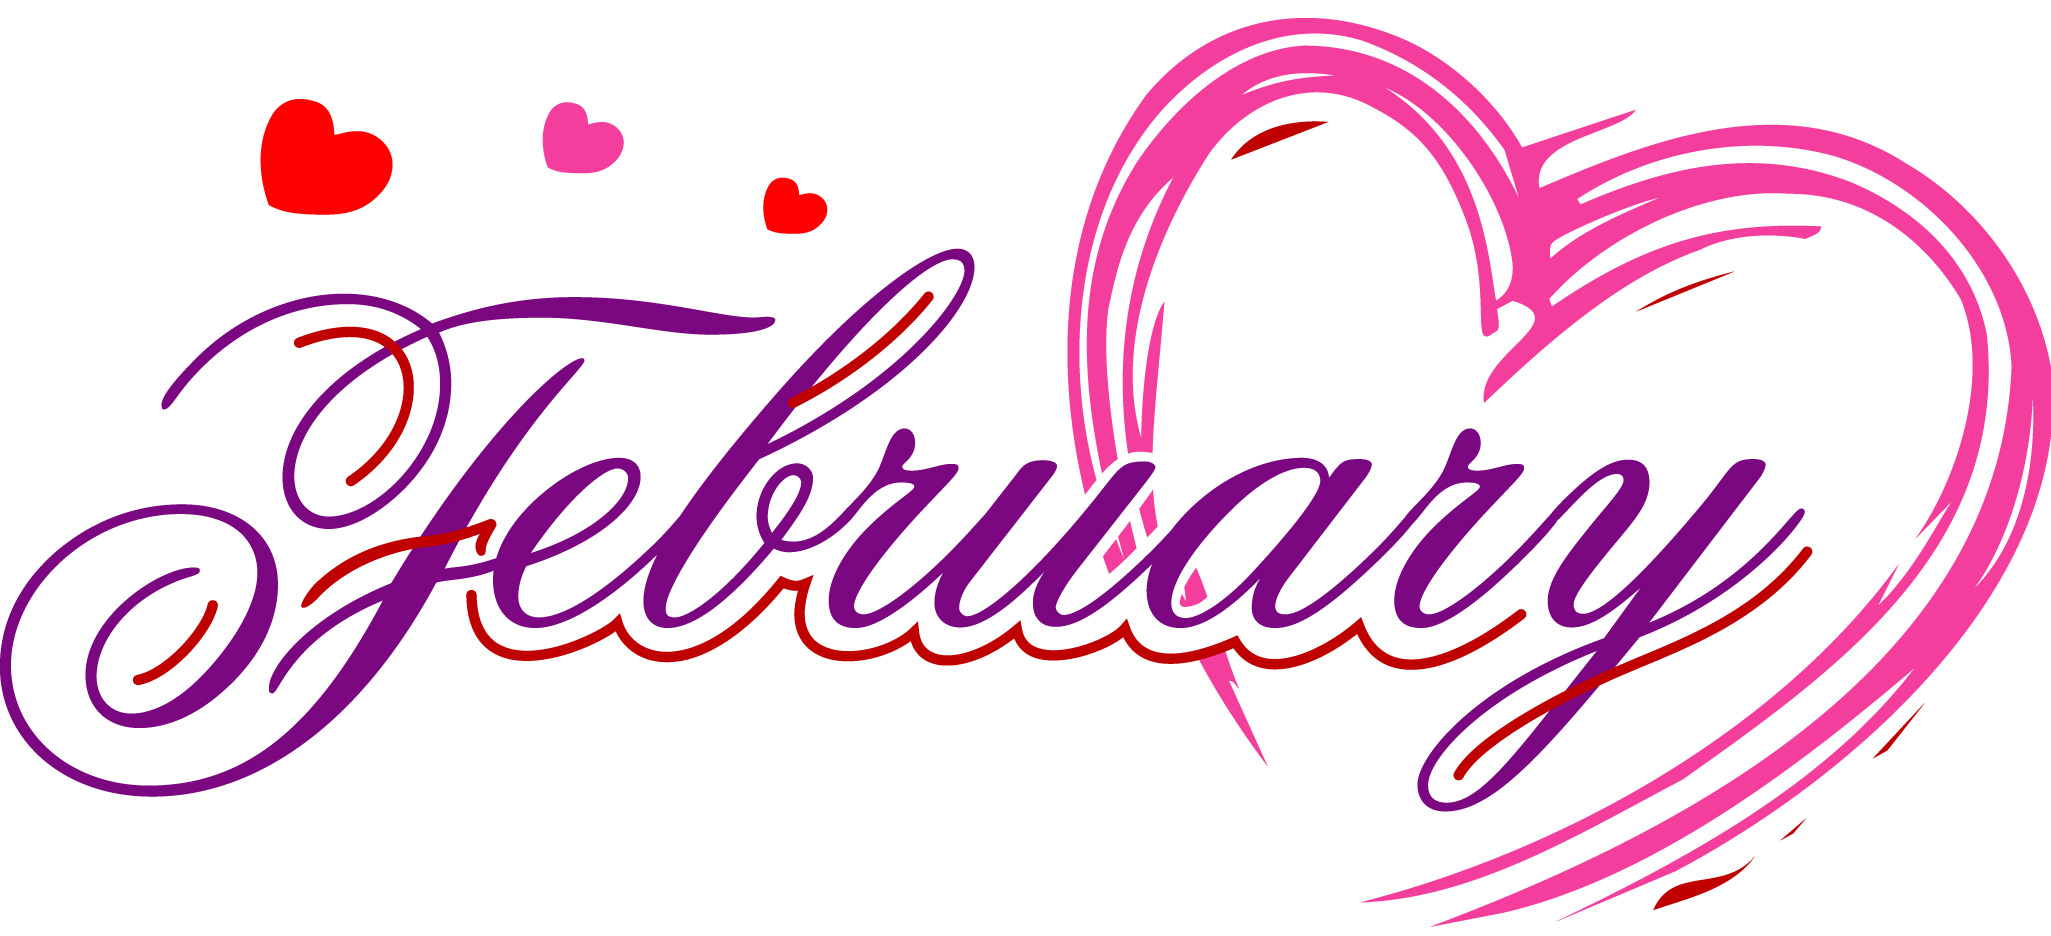 Month Of February Clipart